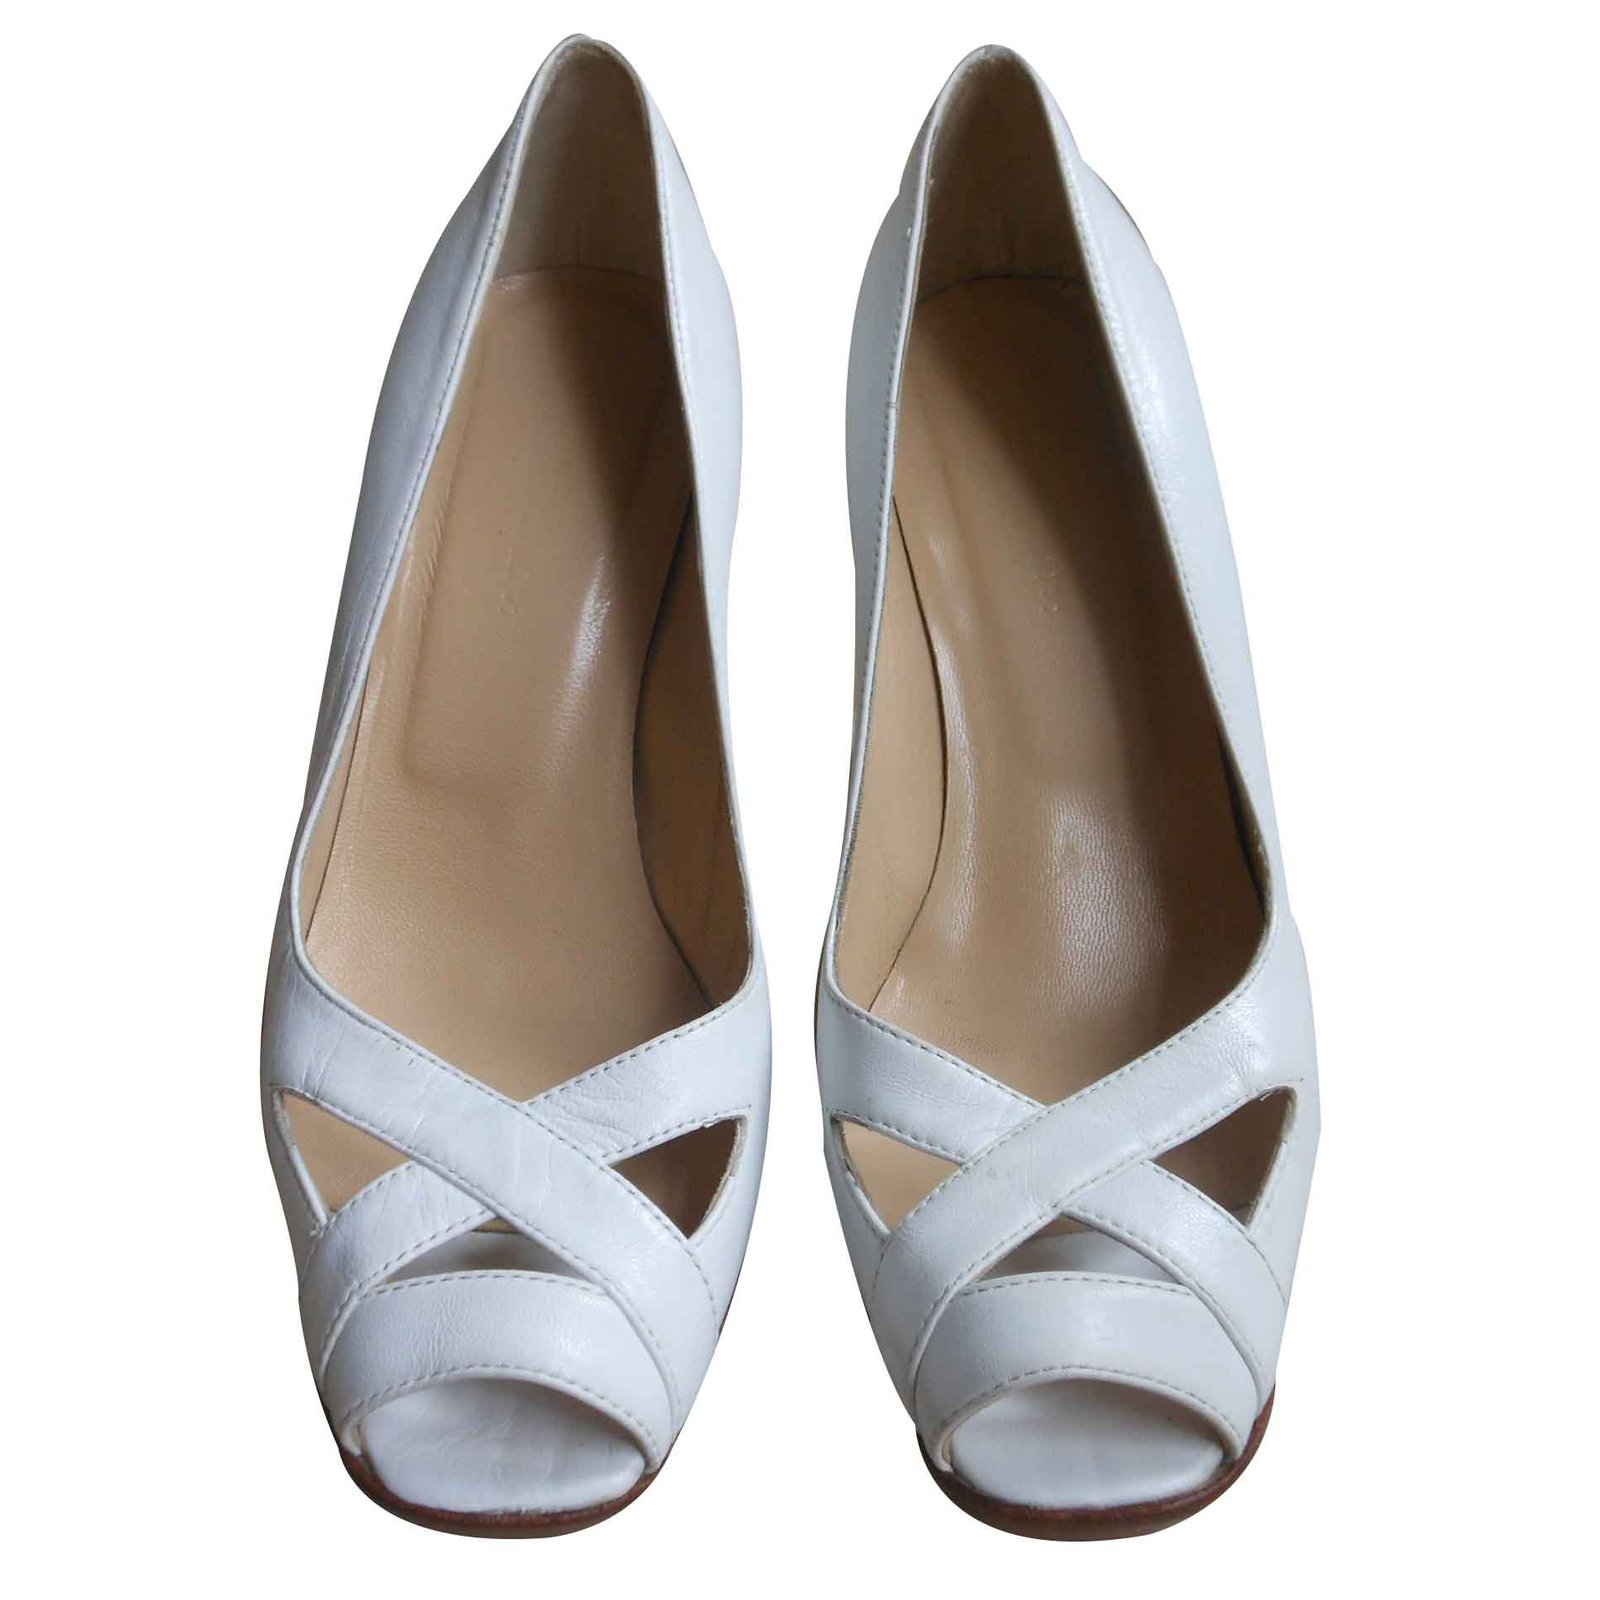 Stunning white leather Hobbs high heel shoes wood effect hell ...